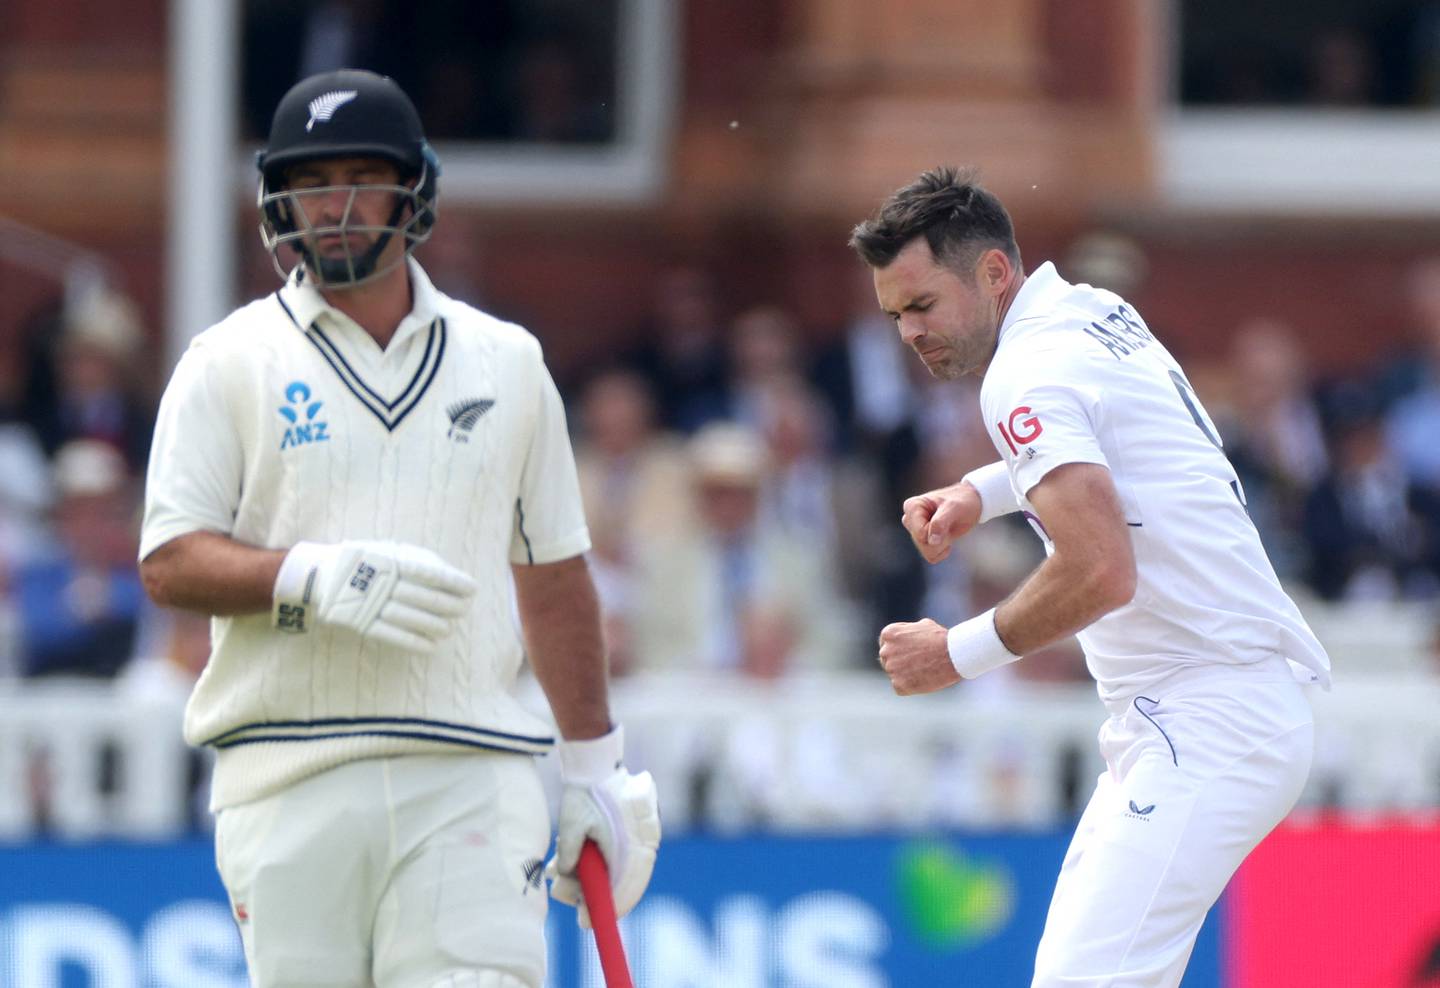 England's James Anderson celebrates after taking the wicket of New Zealand's Tim Southee. Action Images